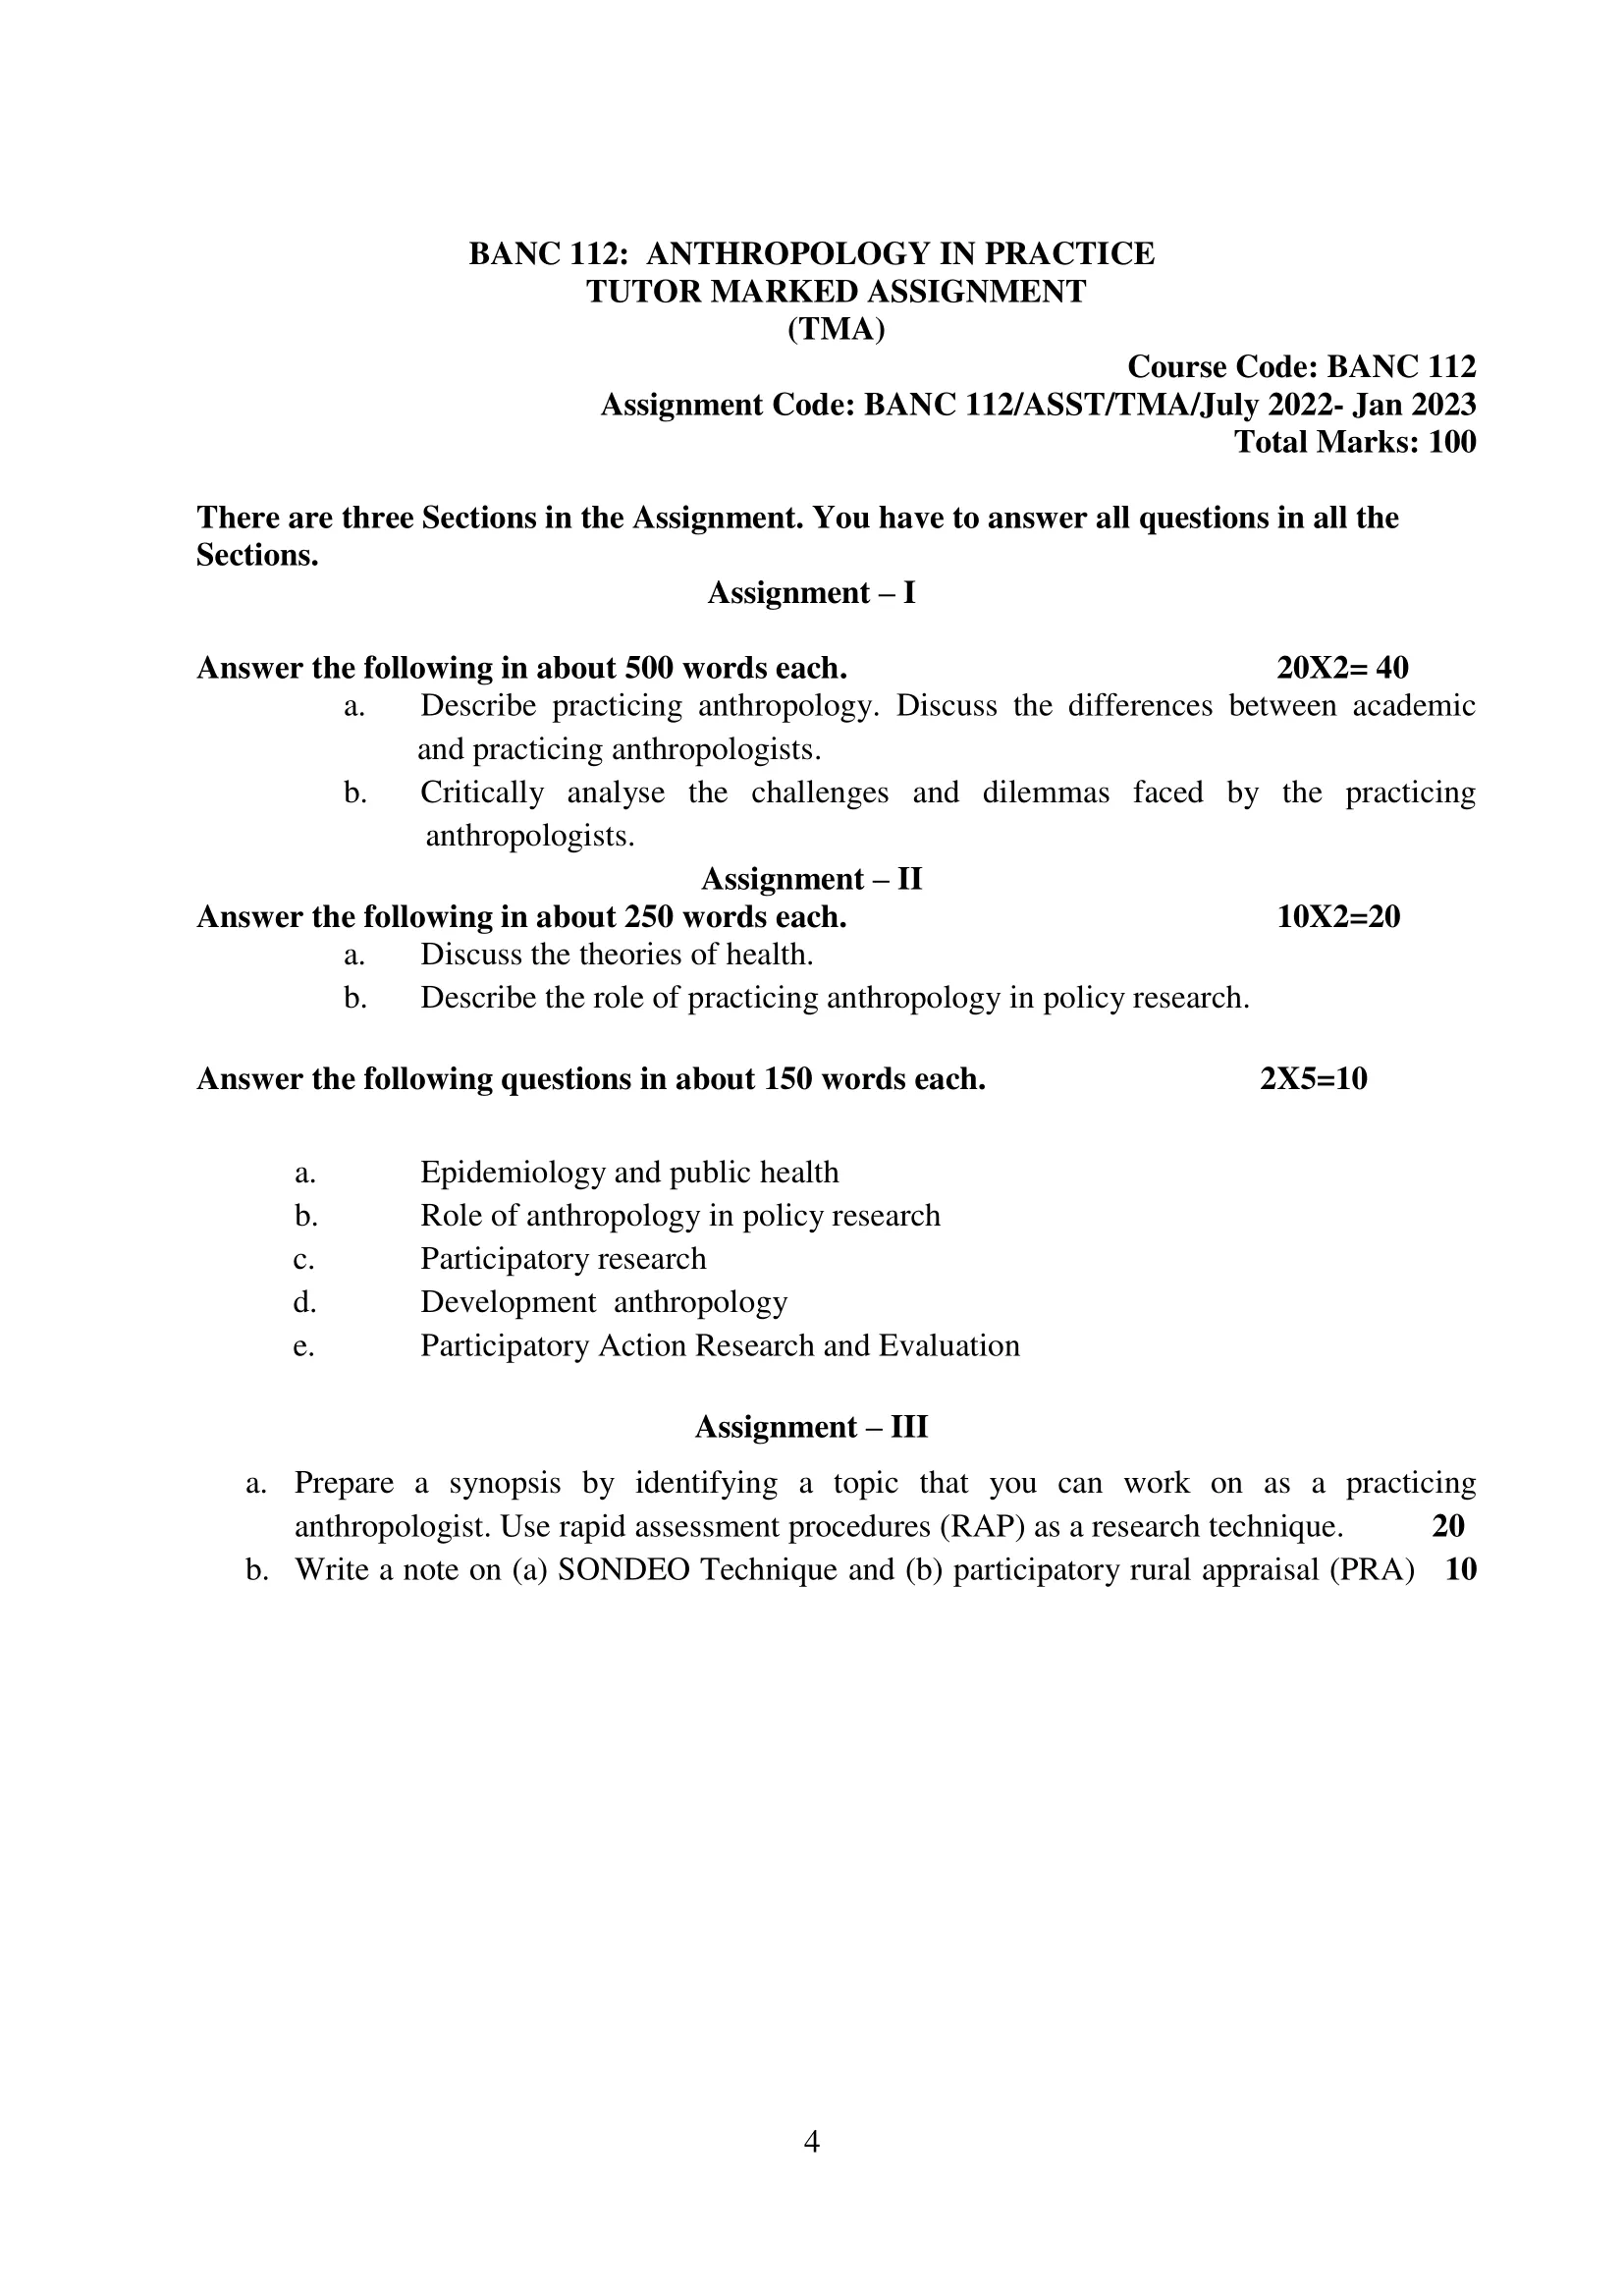 BANC-112 IGNOU Solved Assignment 2022-2023 ANTHROPOLOGY IN PRACTICE